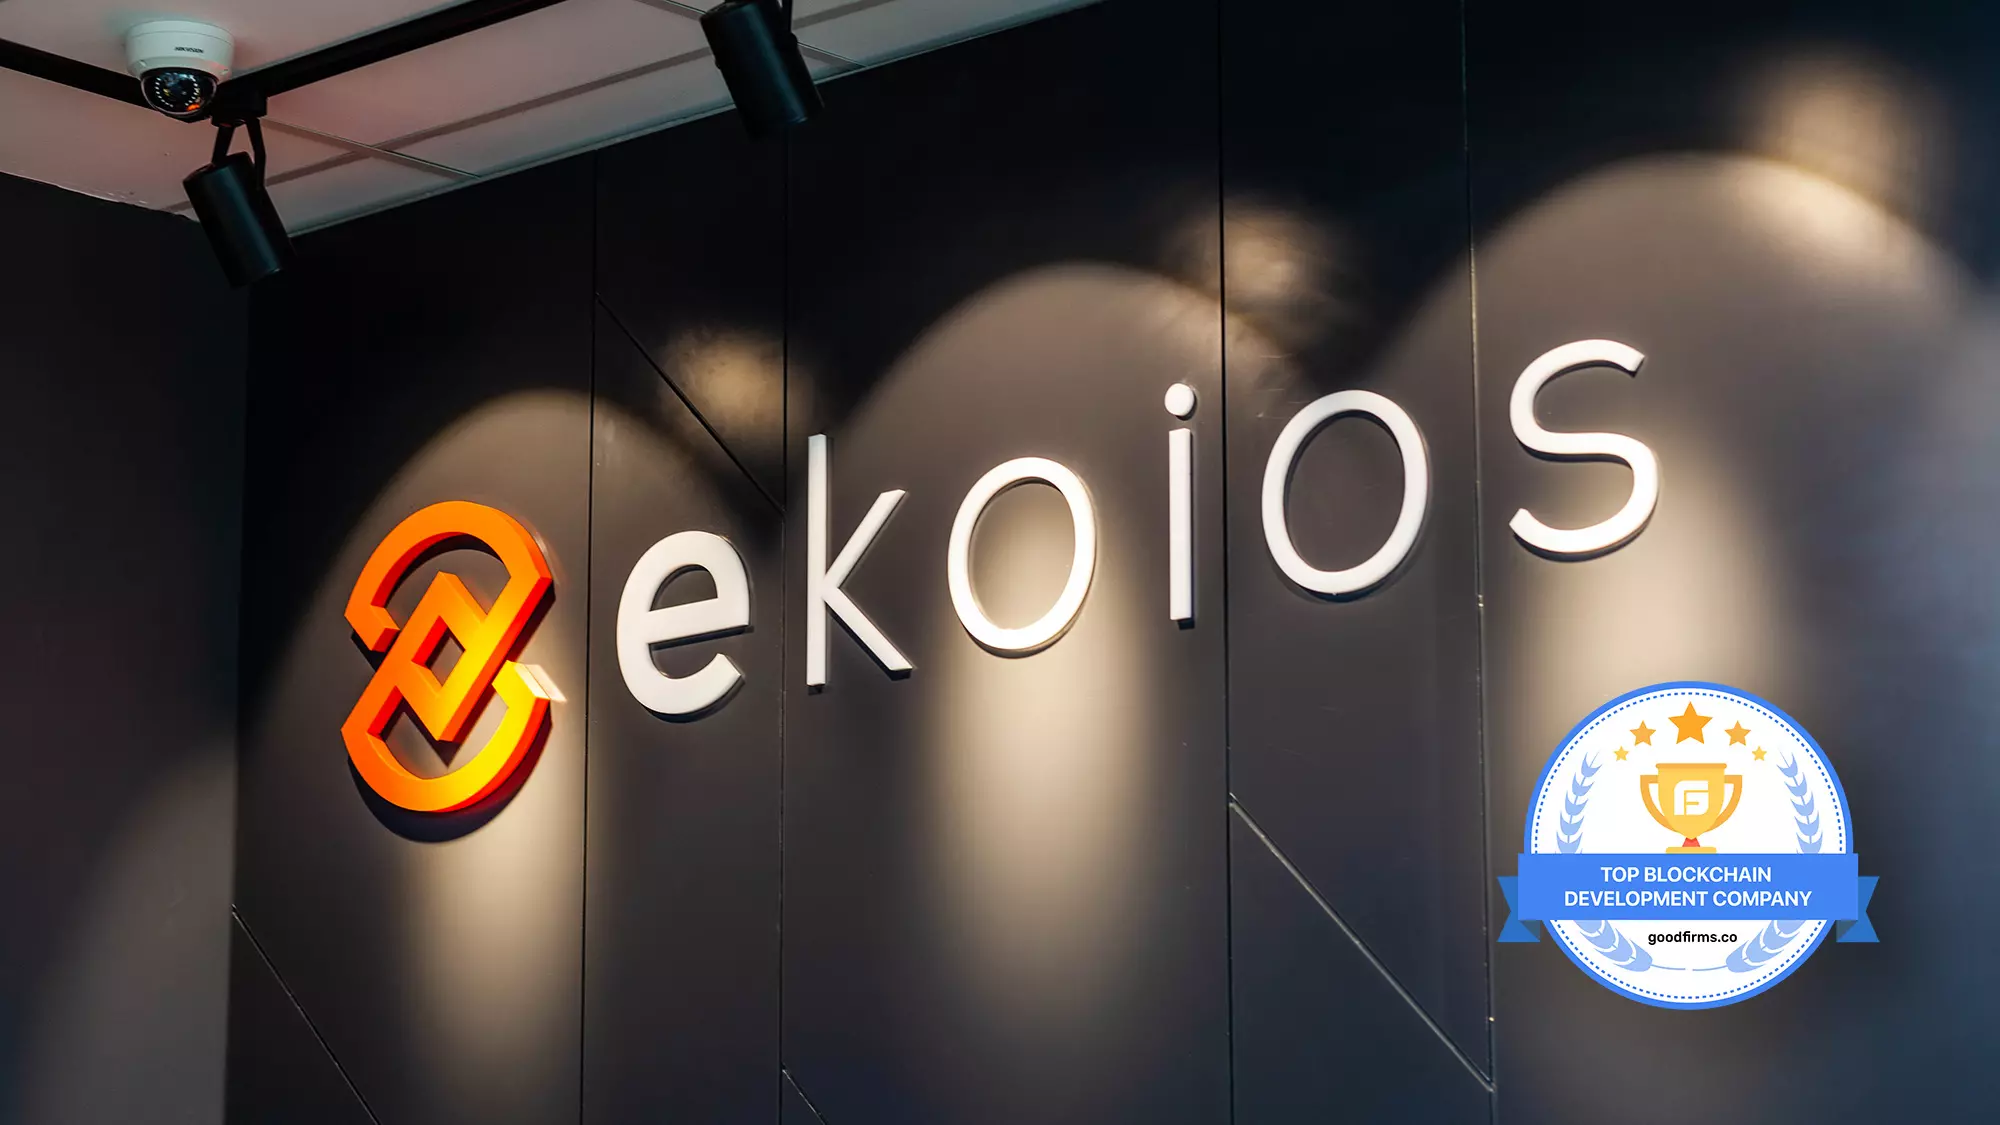 Ekoios Technology Burgeons at GoodFirms by Adopting New Technologies and Providing Robust Blockchain Solutions